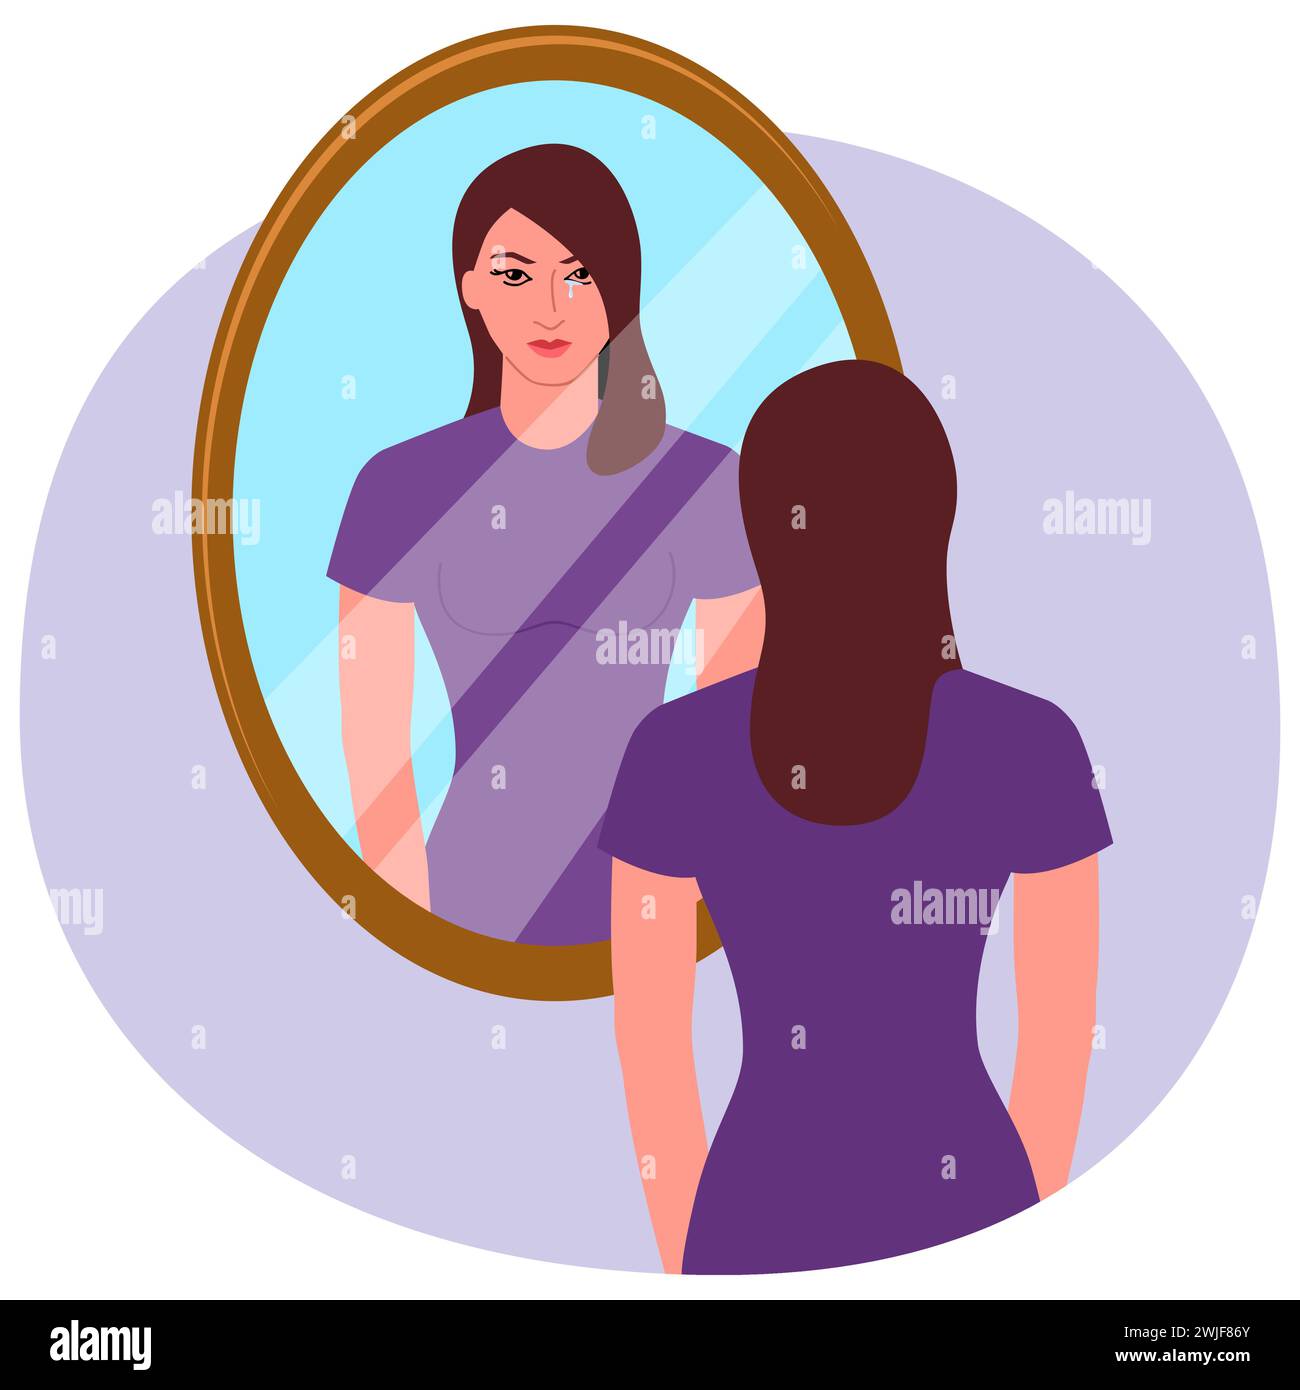 Clip art of a sad young woman looking in the mirror, loneliness, depression, bipolar concept, vector illustration Stock Vector